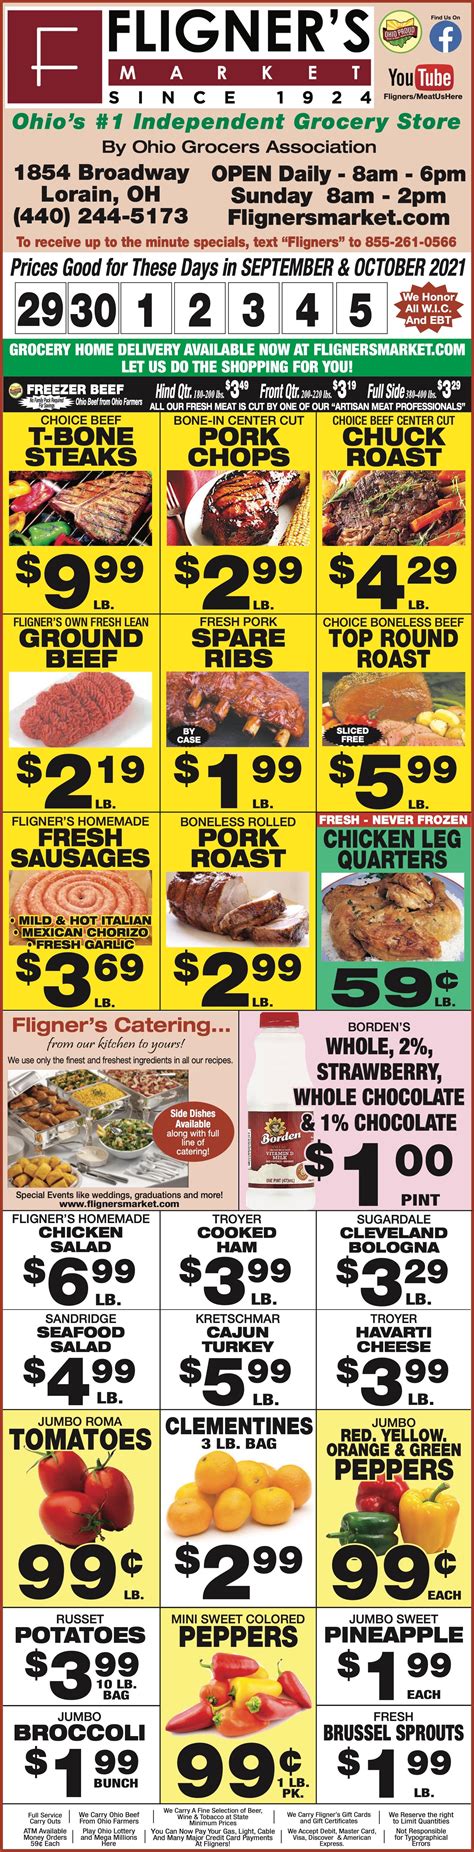 Fligner%27s weekly ad - Feb 12, 2019 · Fligner's Market. February 12, 2019 ·. Fligner's Weekly Ad. archive.aweber.com. 02-12-2019 - Fligner's Weekly Ad. 3232. 5 comments 11 shares. 